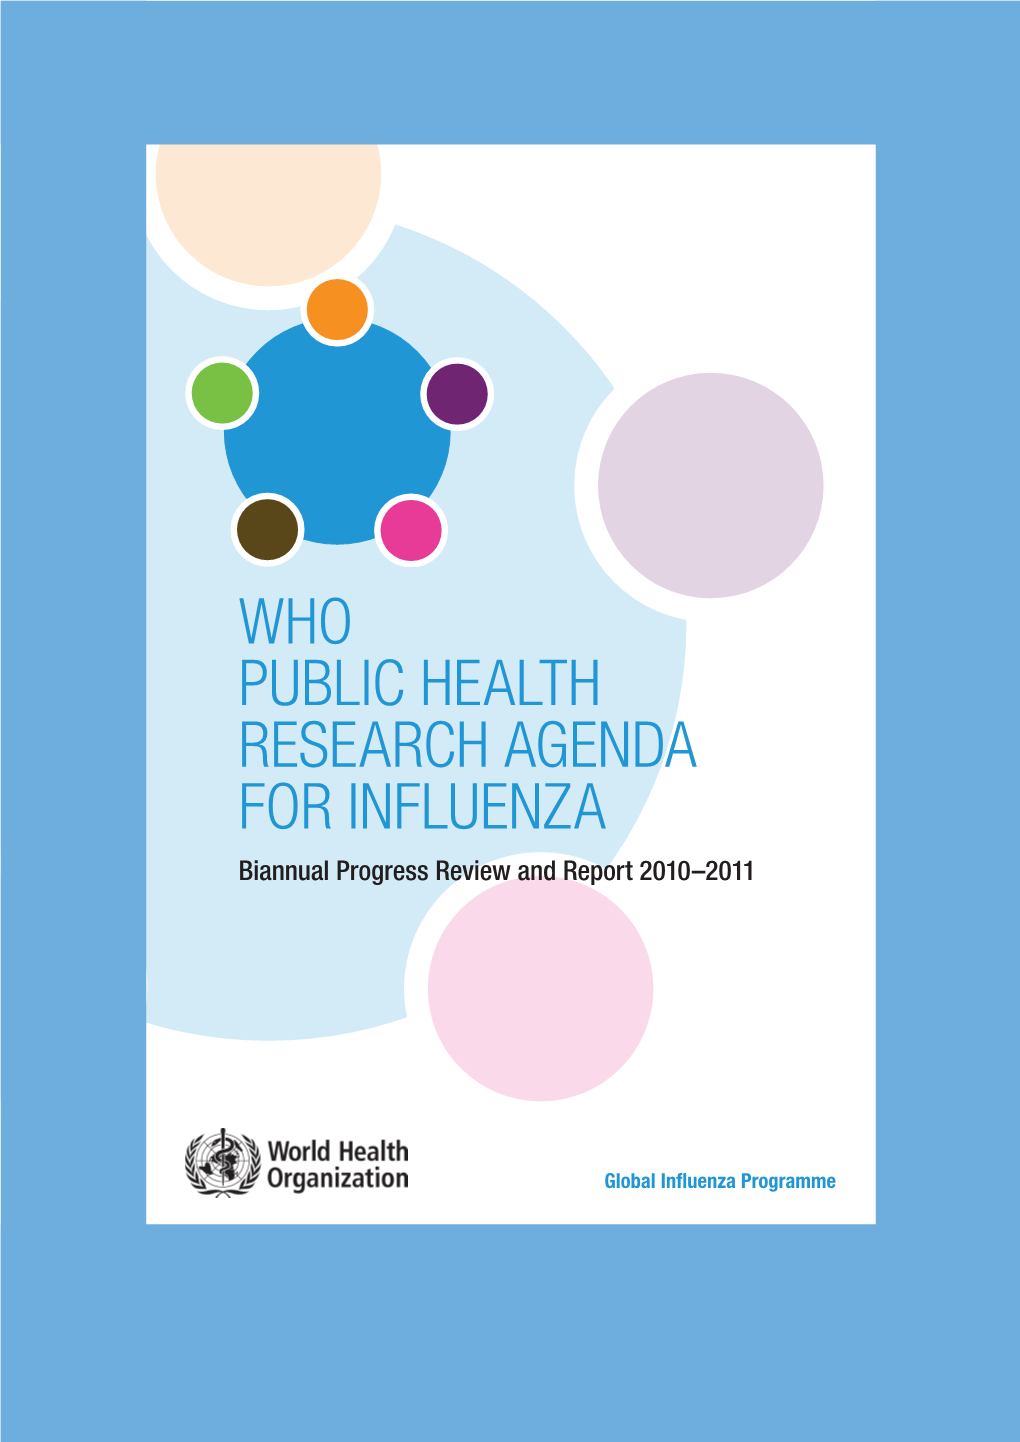 WHO PUBLIC HEALTH RESEARCH AGENDA for INFLUENZA Biannual Progress Review and Report 2010–2011